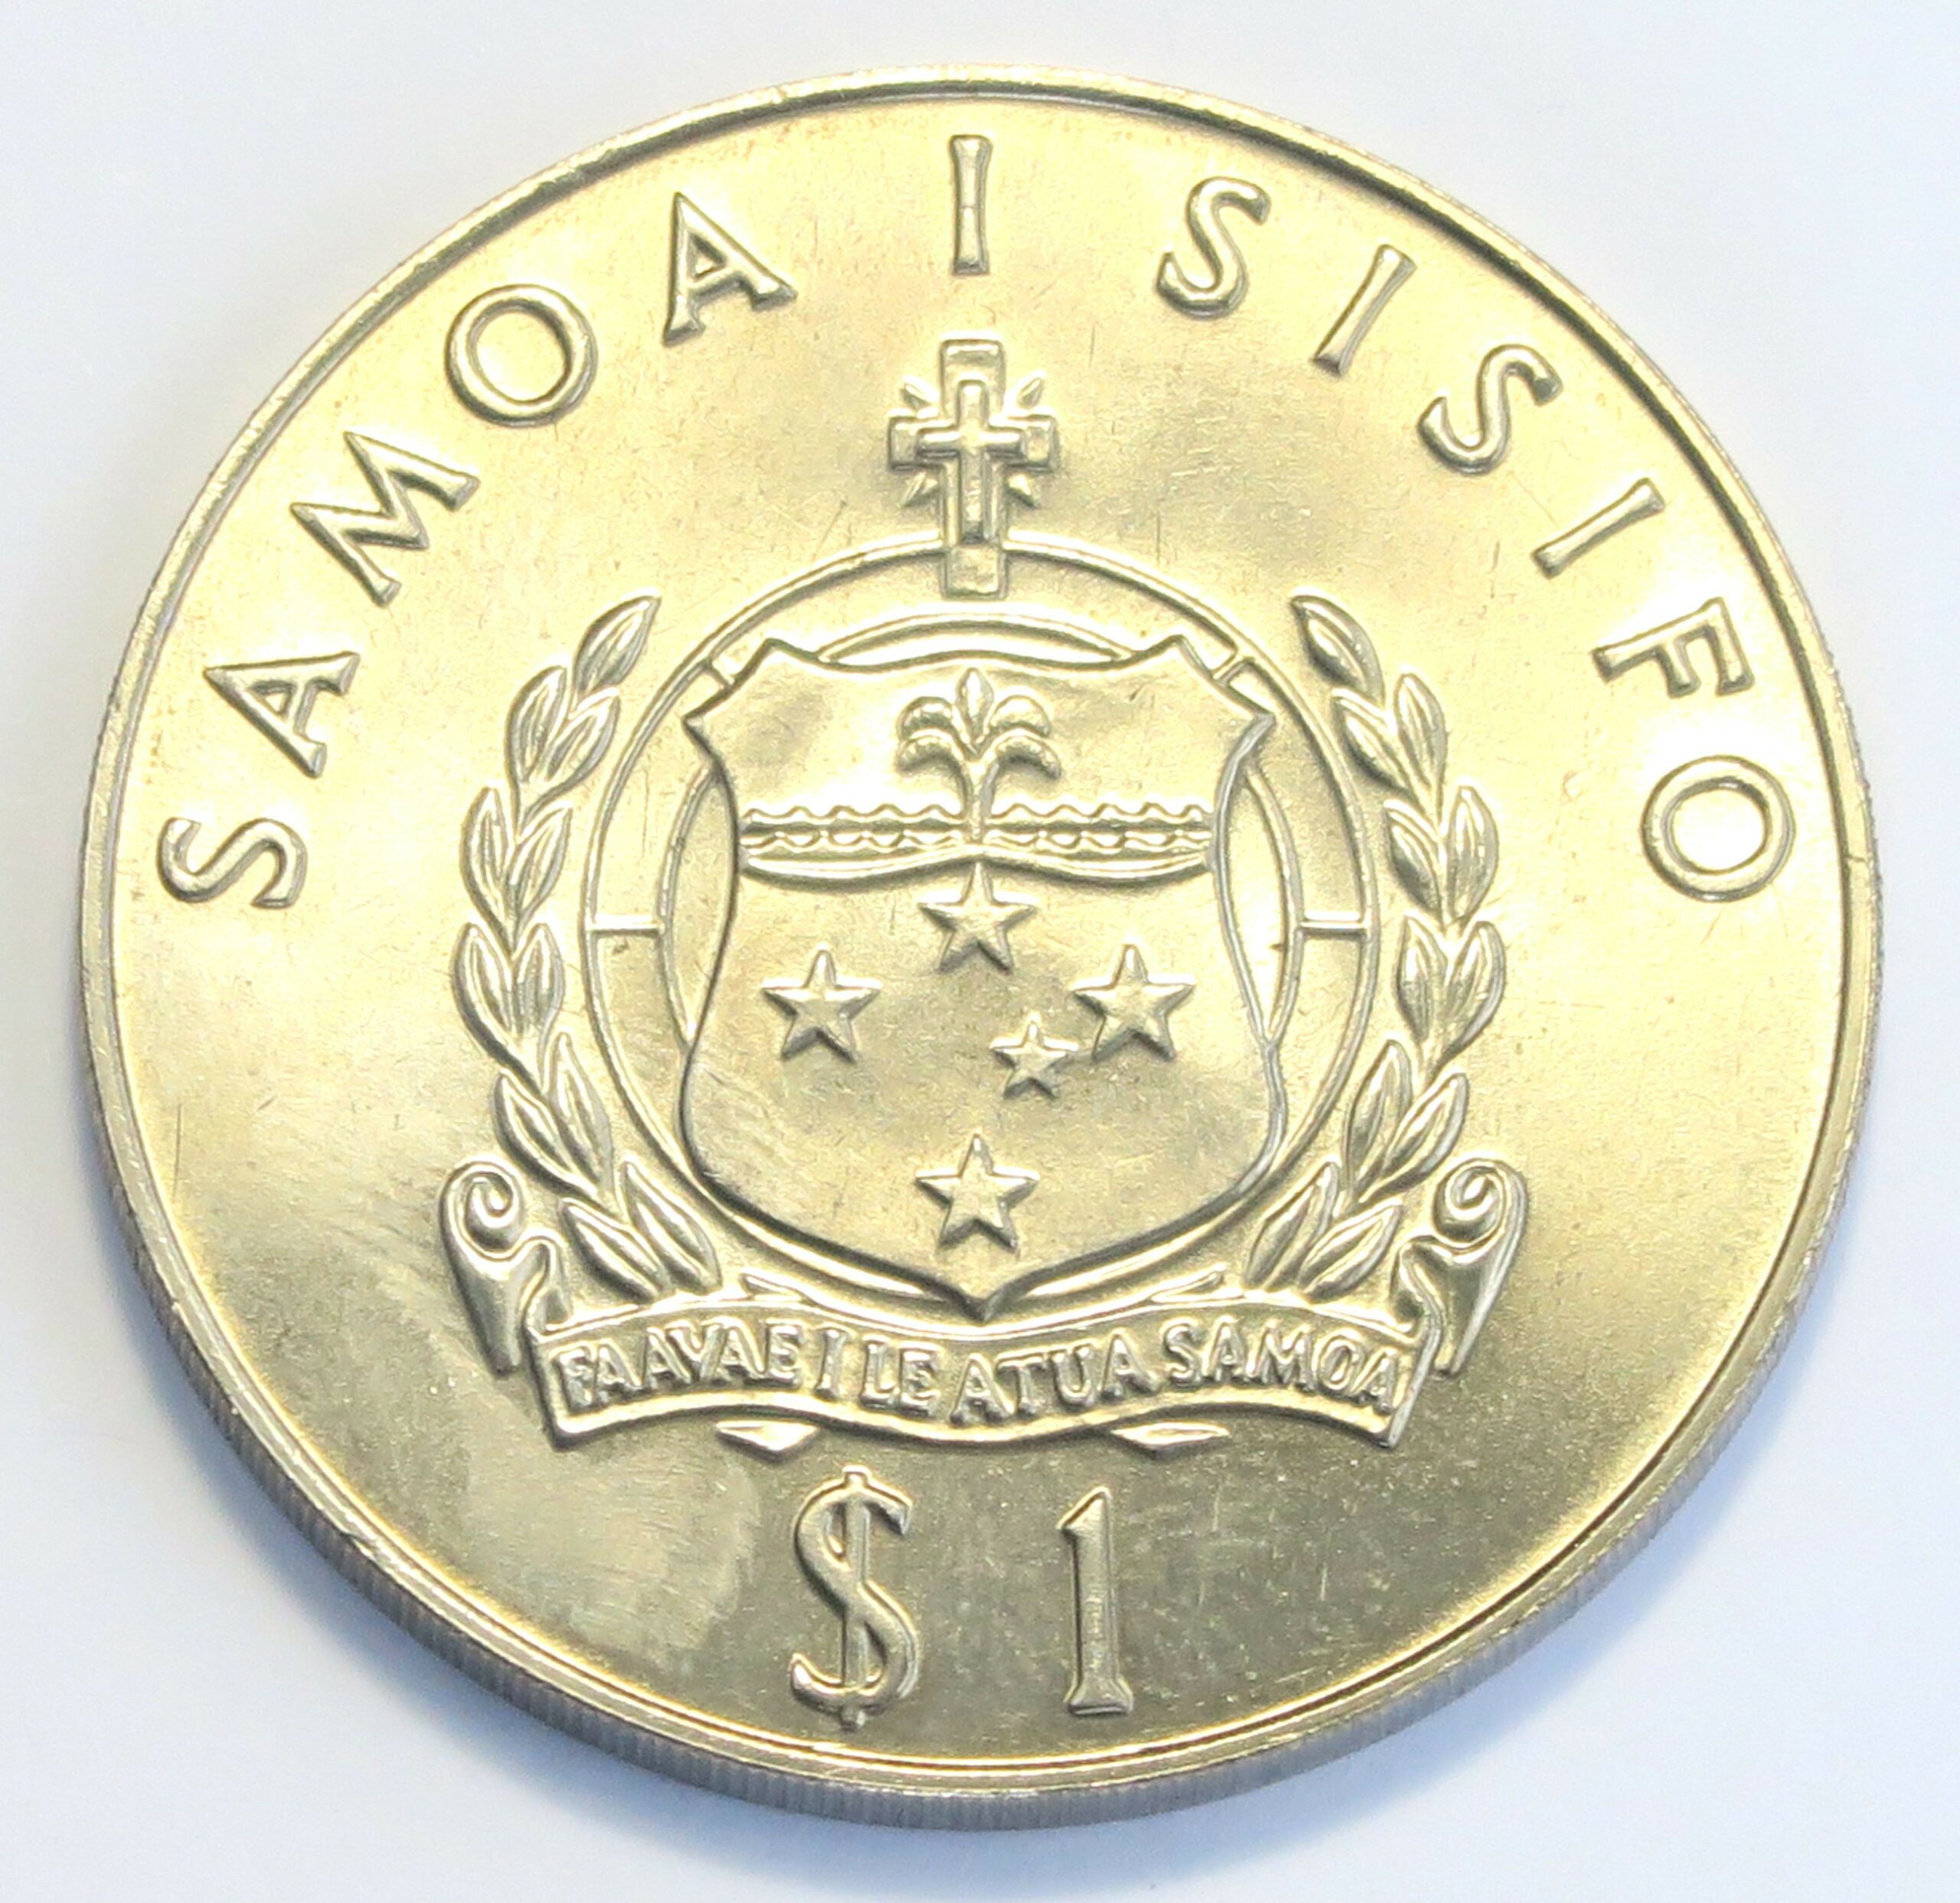 Samoa Javelin Tala 1982 - colonialcollectables buying and selling coins ...